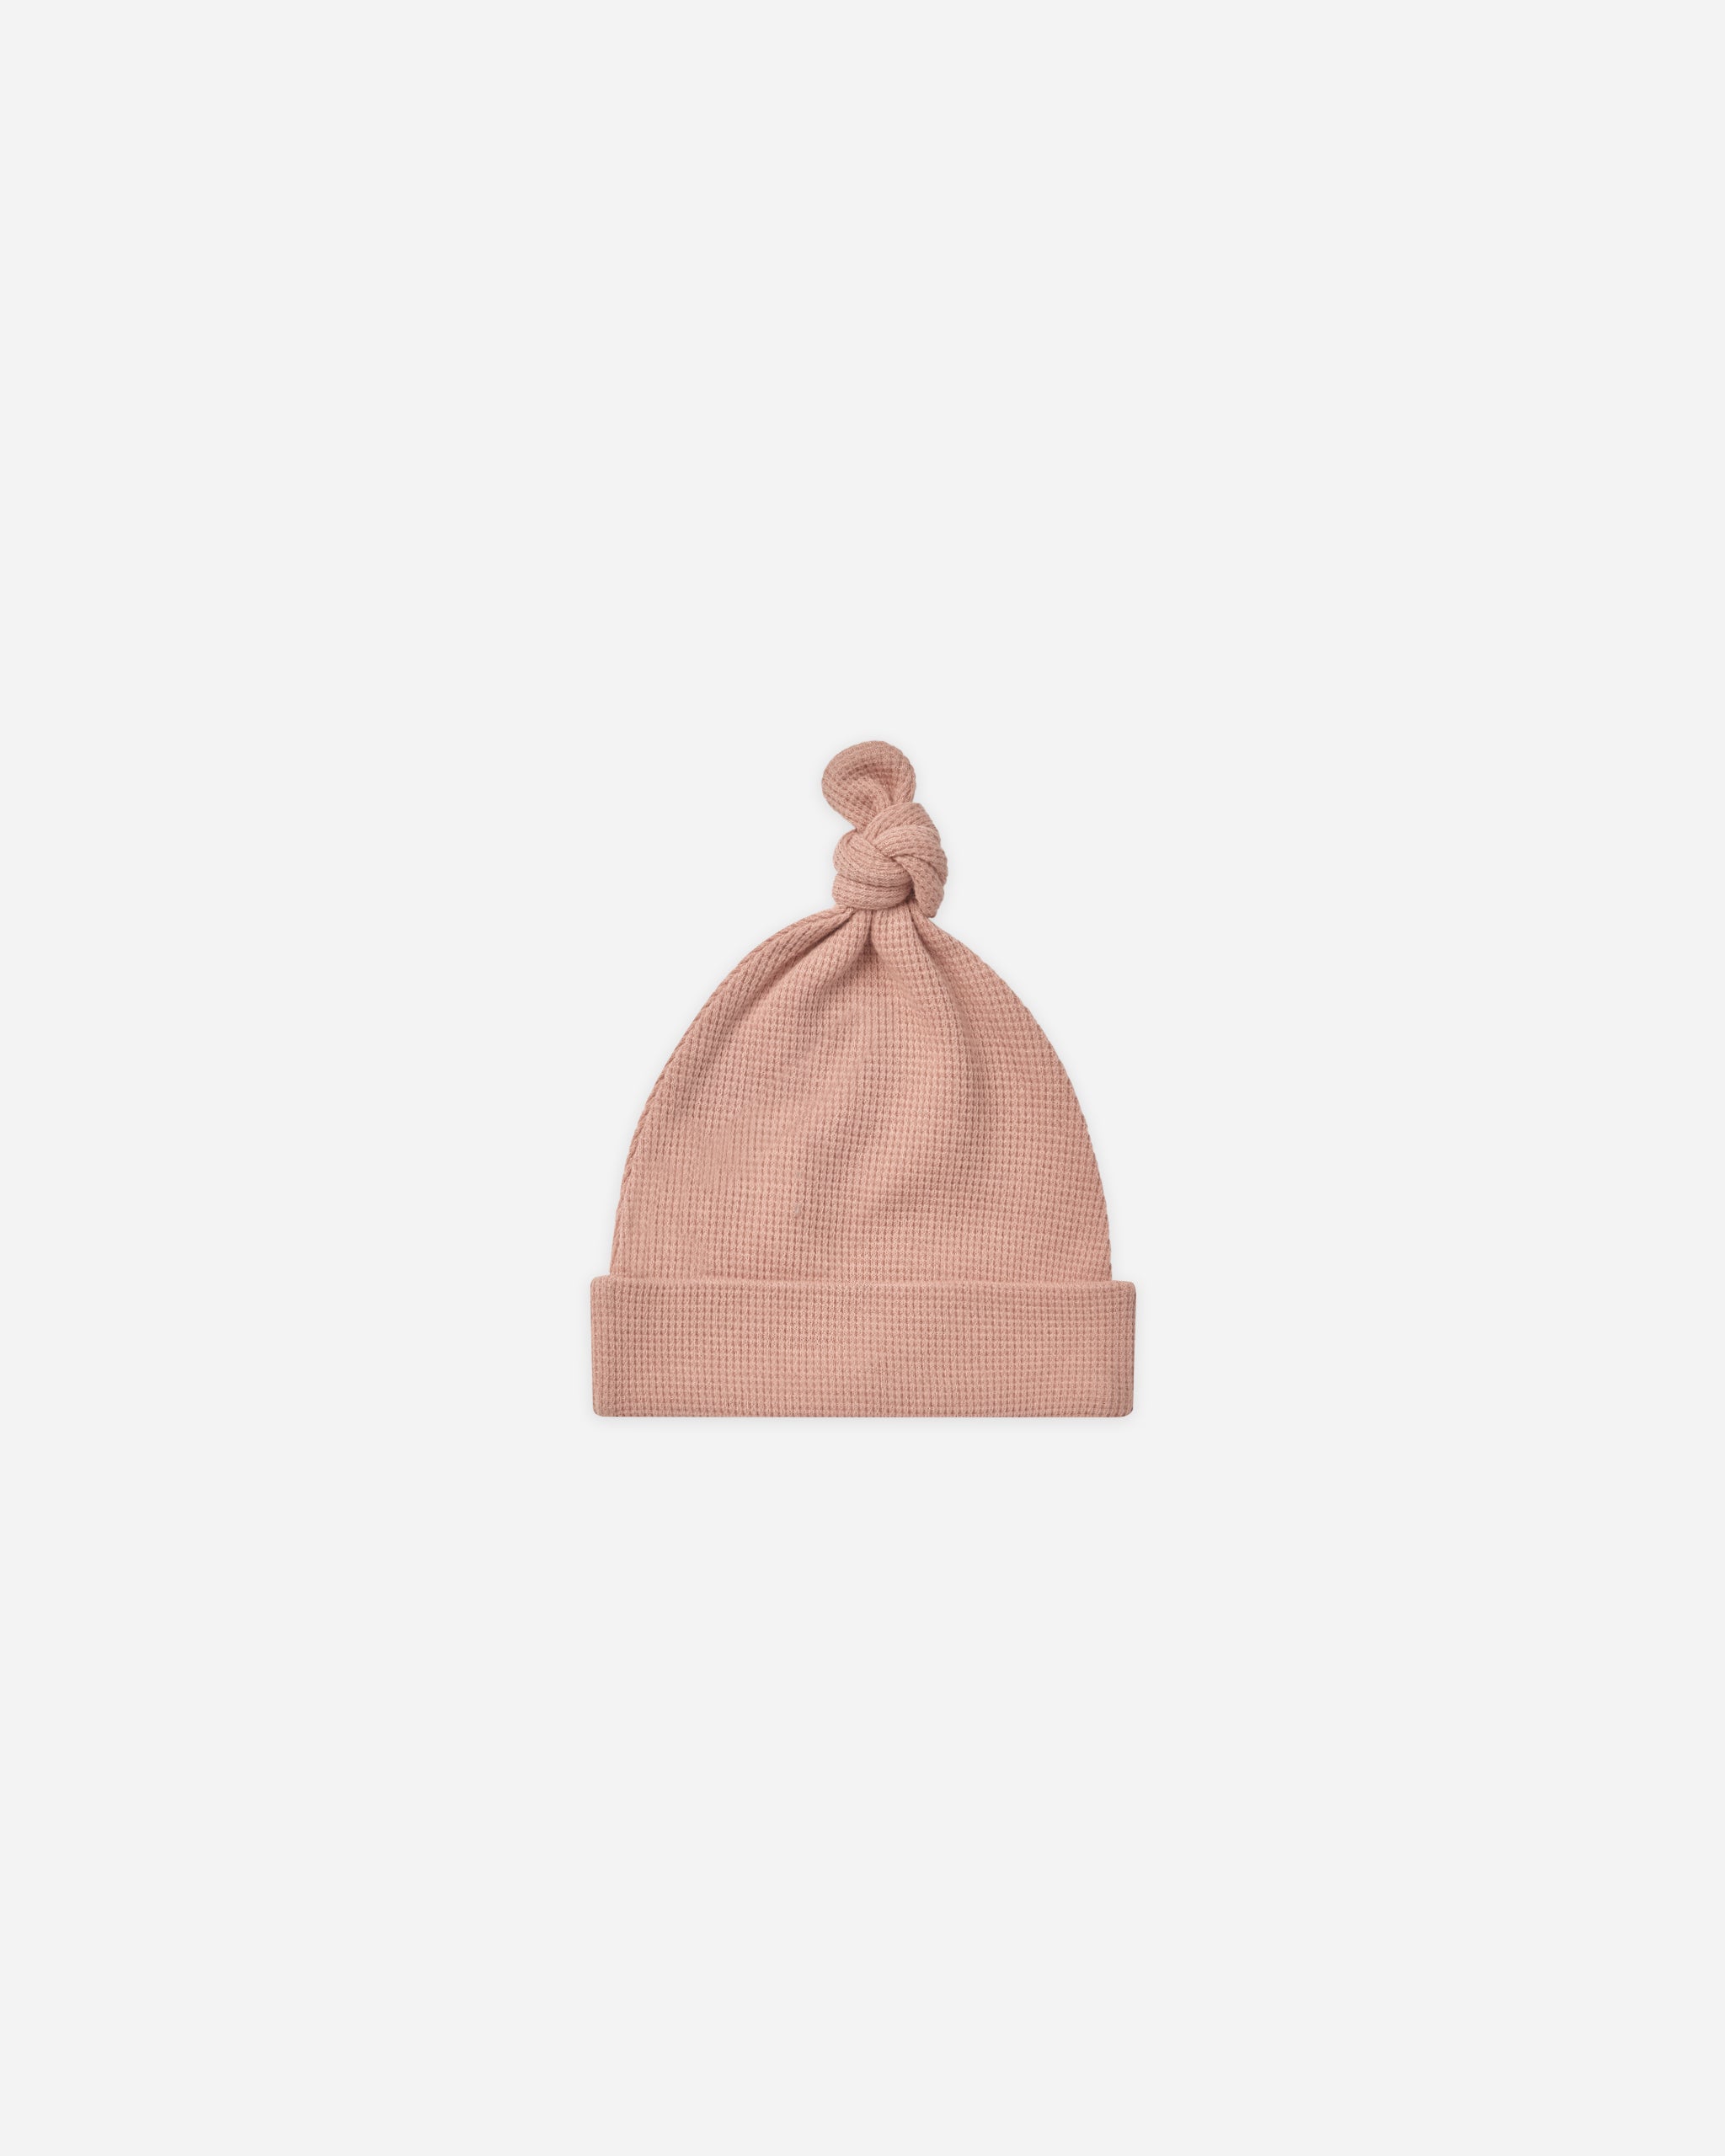 Waffle Knotted Baby Hat || Rose - Rylee + Cru | Kids Clothes | Trendy Baby Clothes | Modern Infant Outfits |